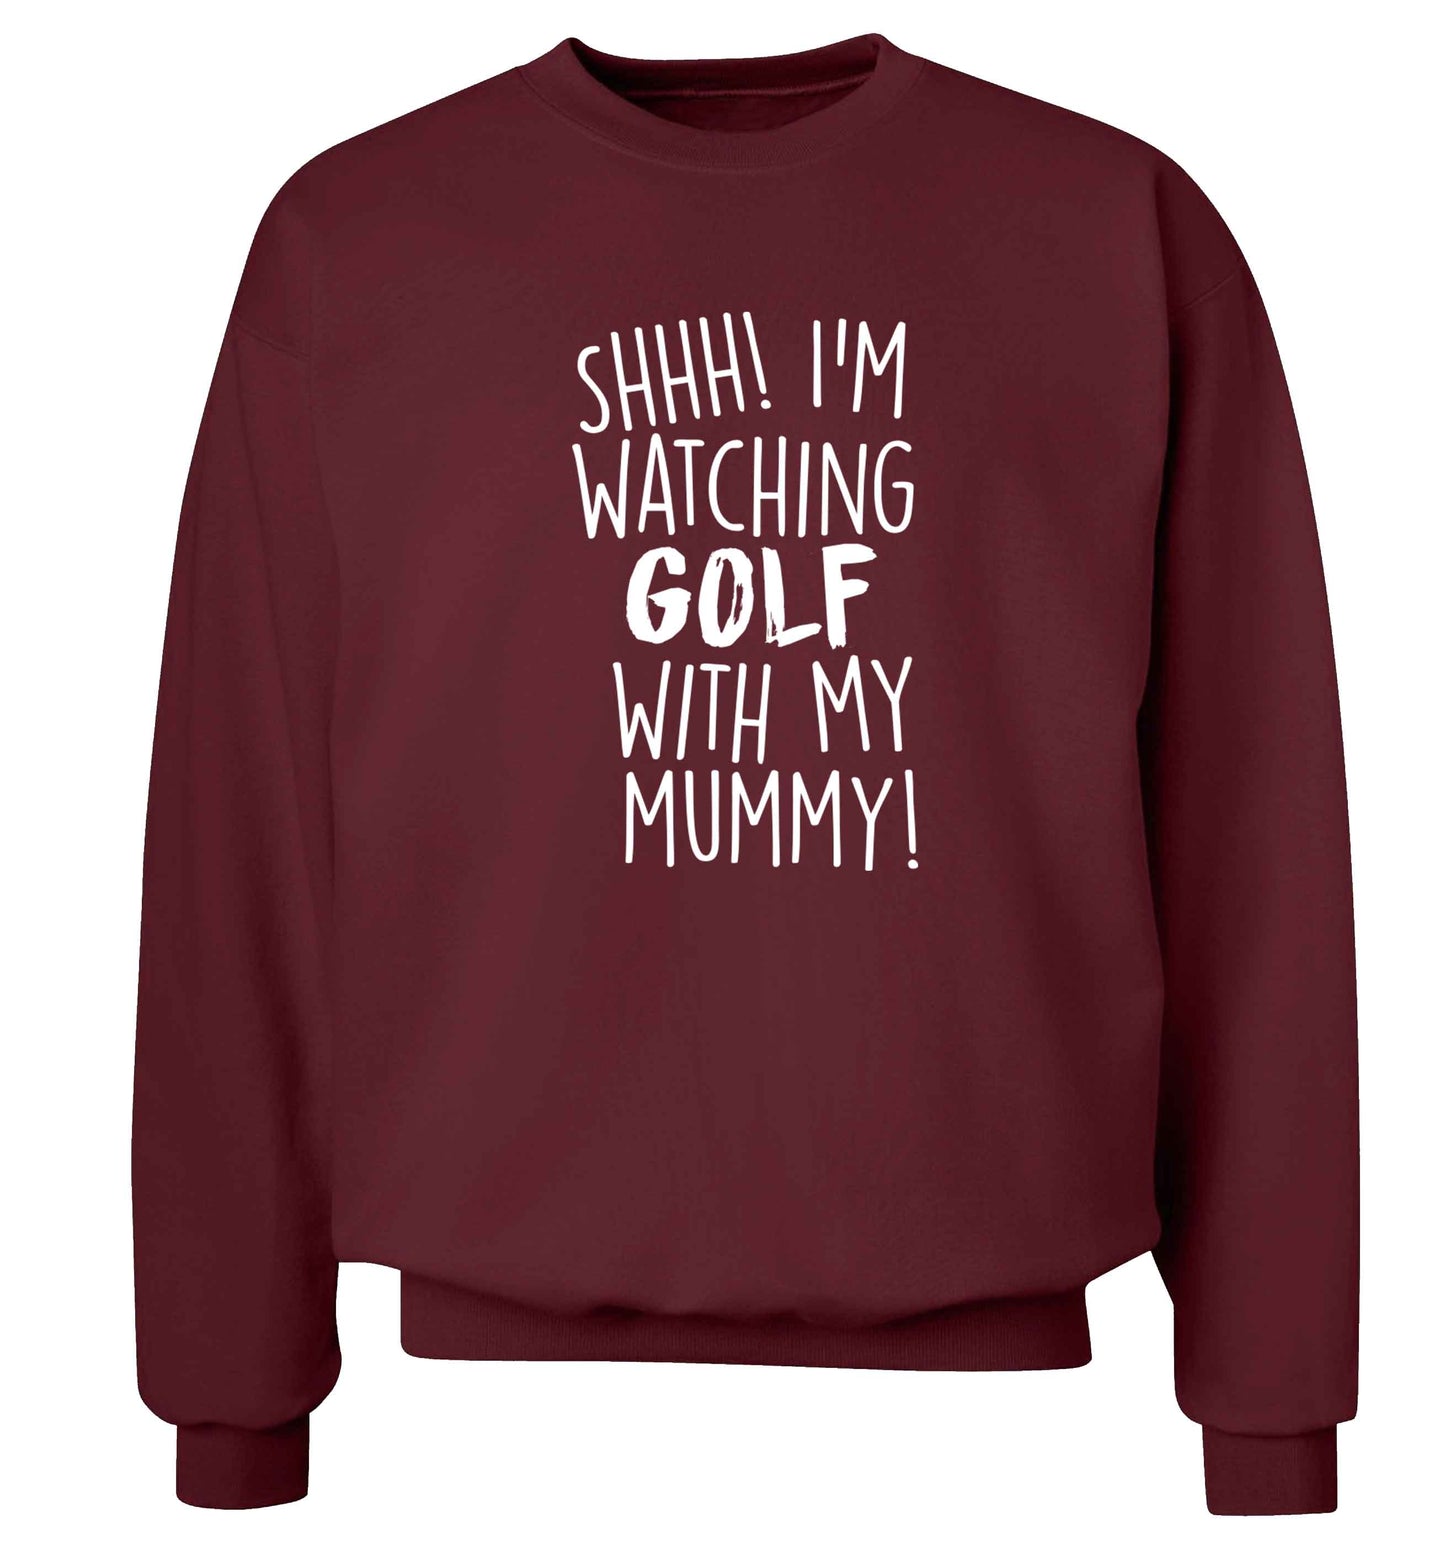 Shh I'm watching golf with my mummy Adult's unisex maroon Sweater 2XL